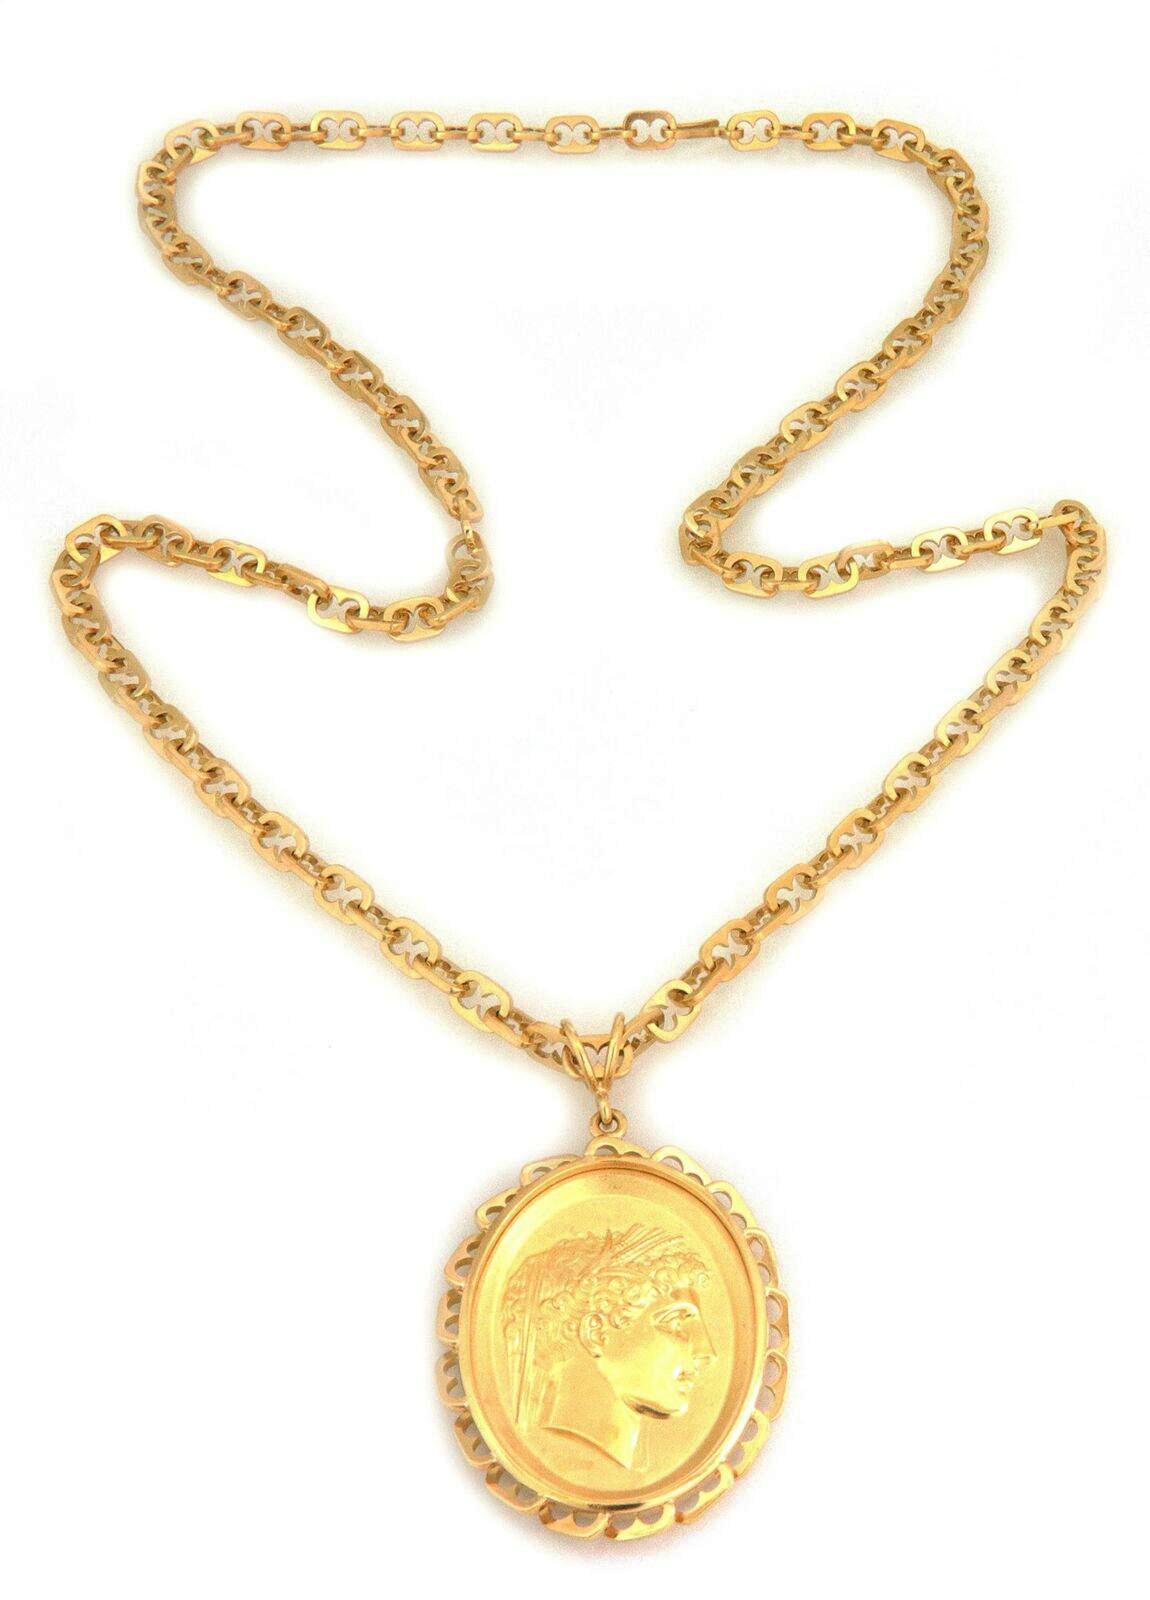 Wachler Signed 18k Yellow Gold Embossed Woman Cameo Oval Pendant Necklace In Excellent Condition For Sale In Boca Raton, FL